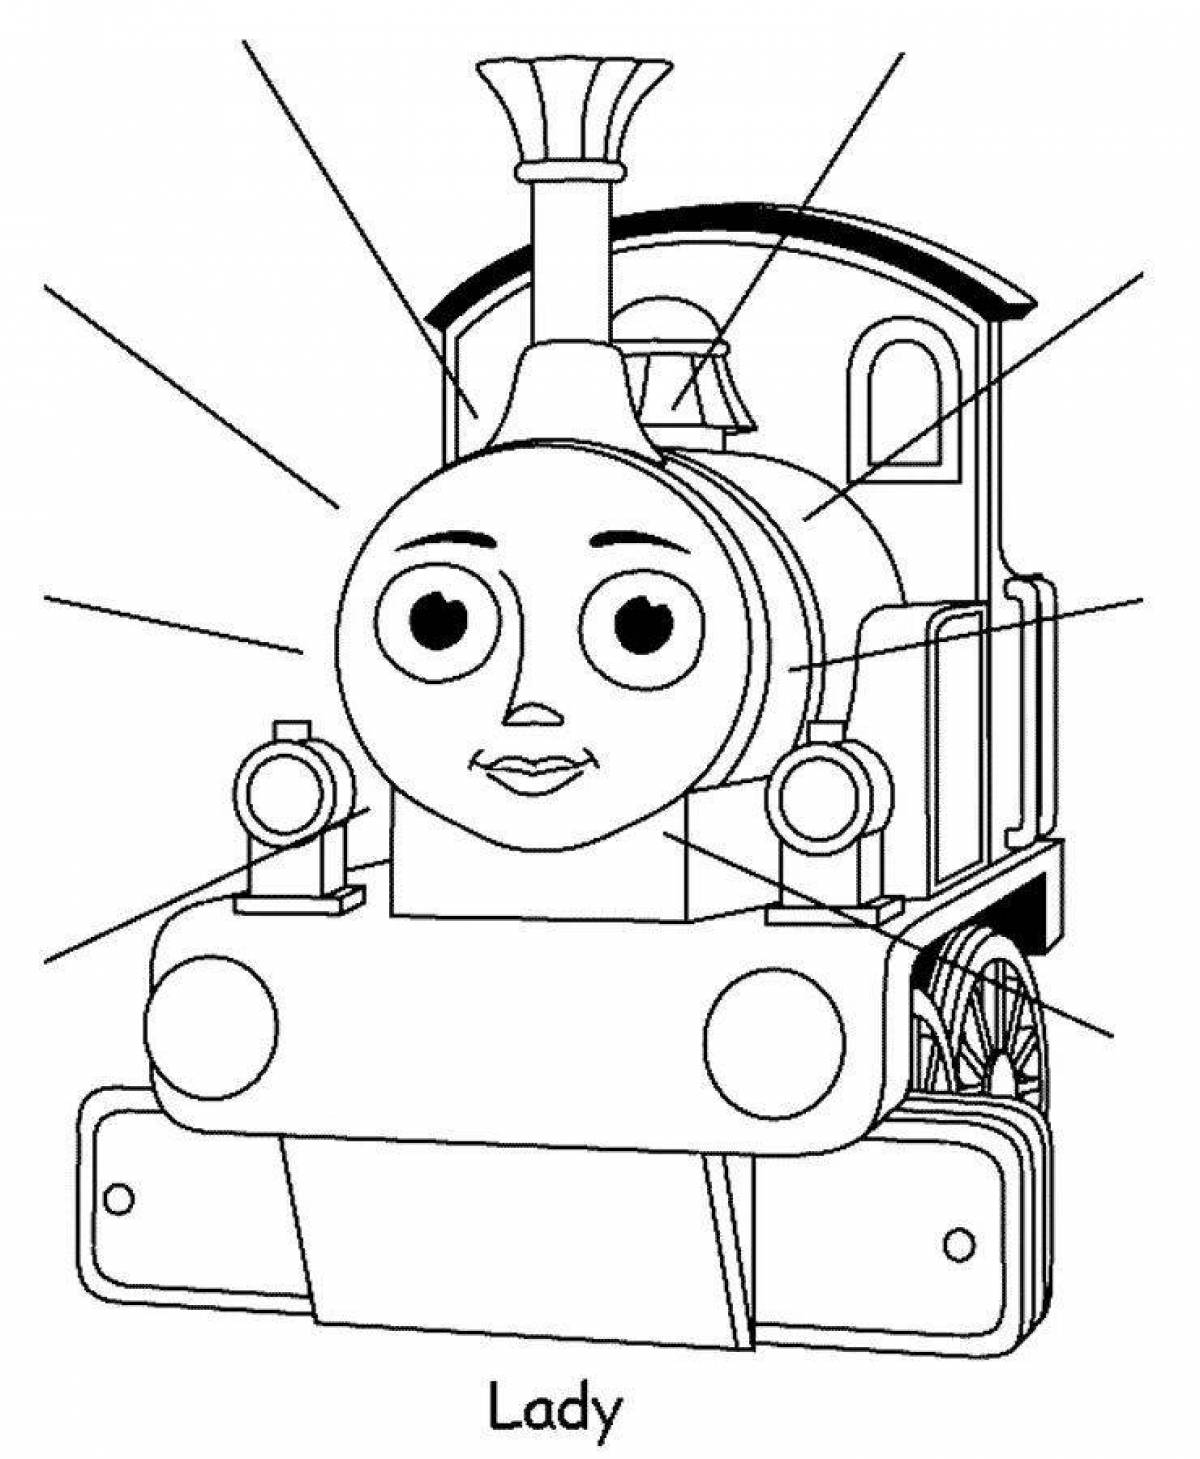 Charlie the engine coloring page